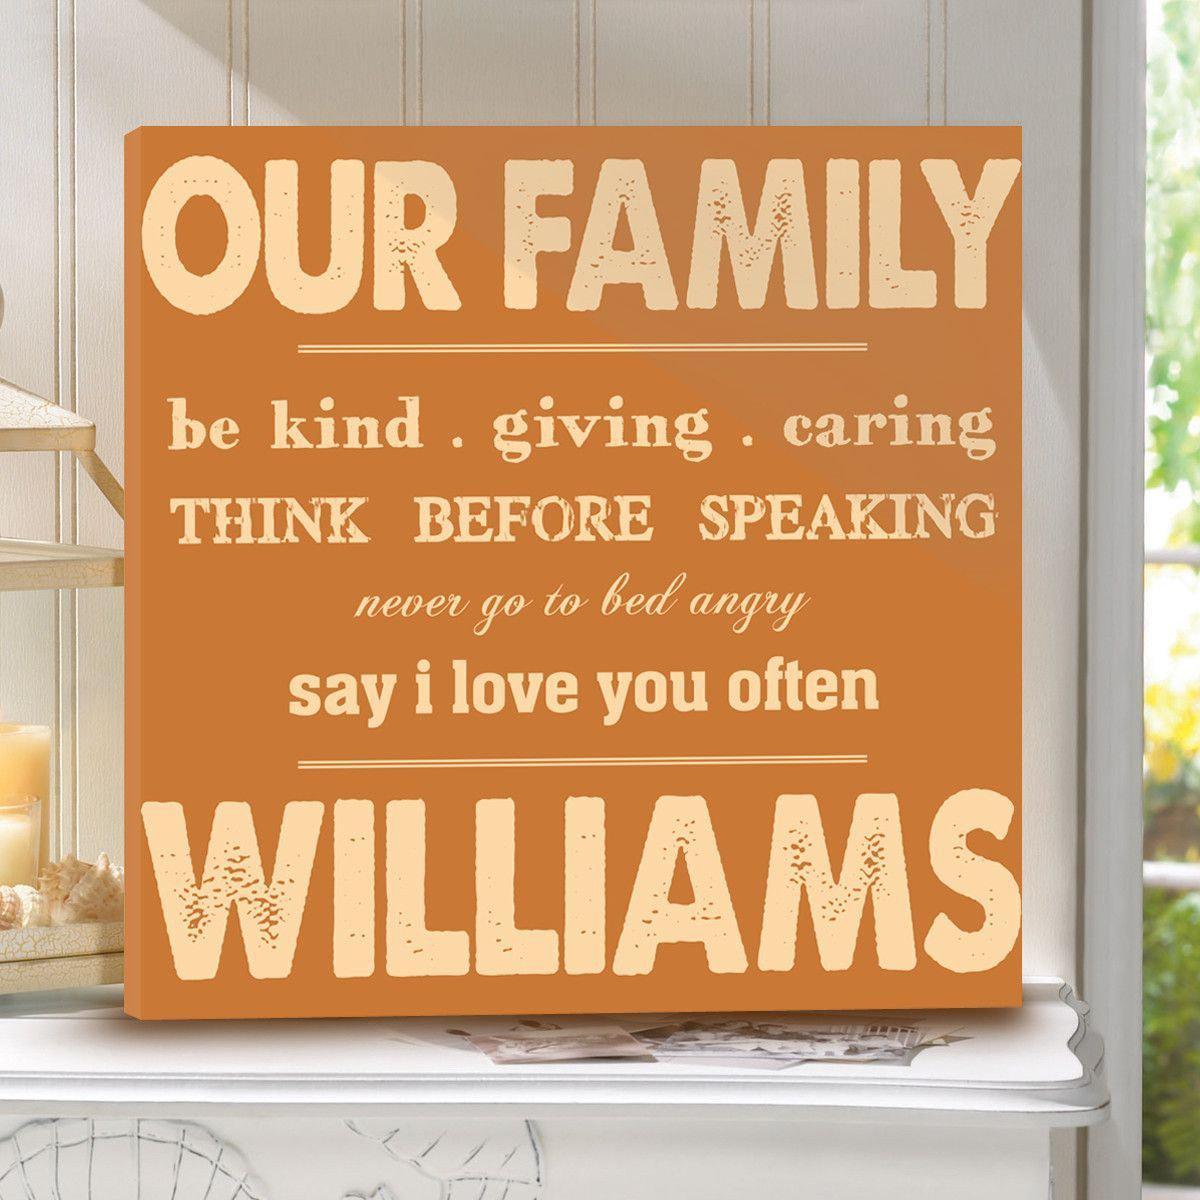 Rules of Our Family Canvas Sign